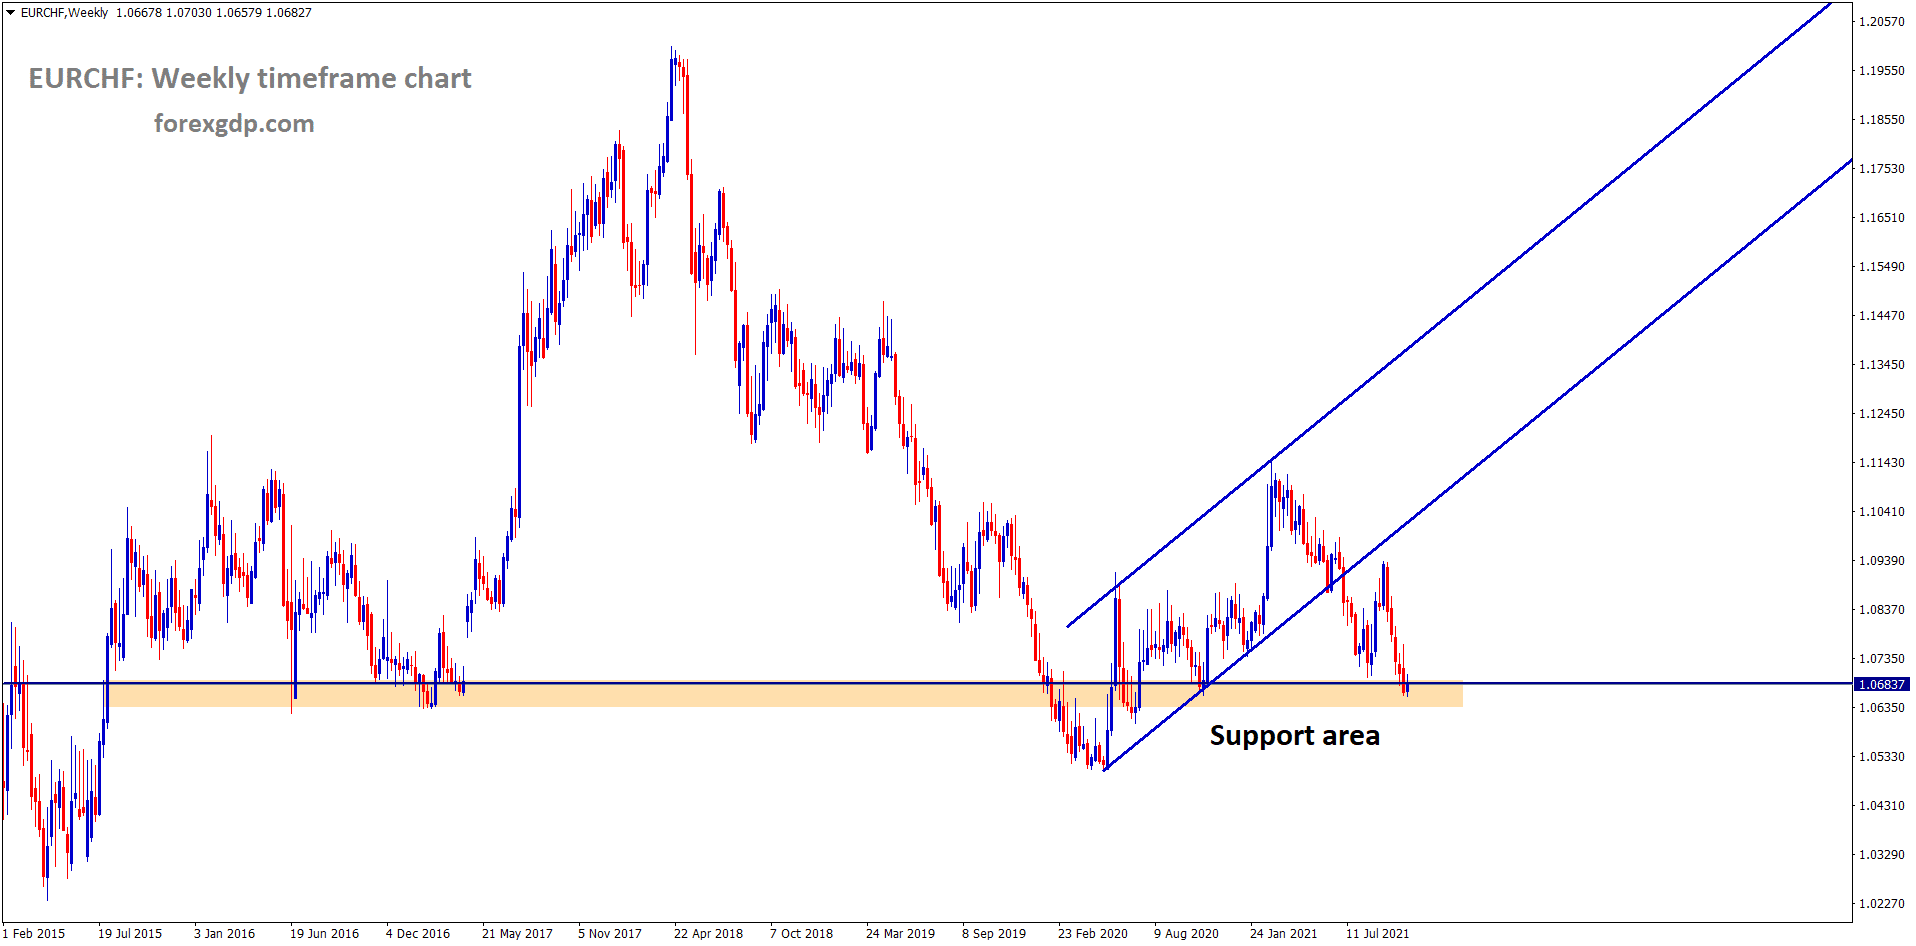 EURCHF market price standing at the weekly support area